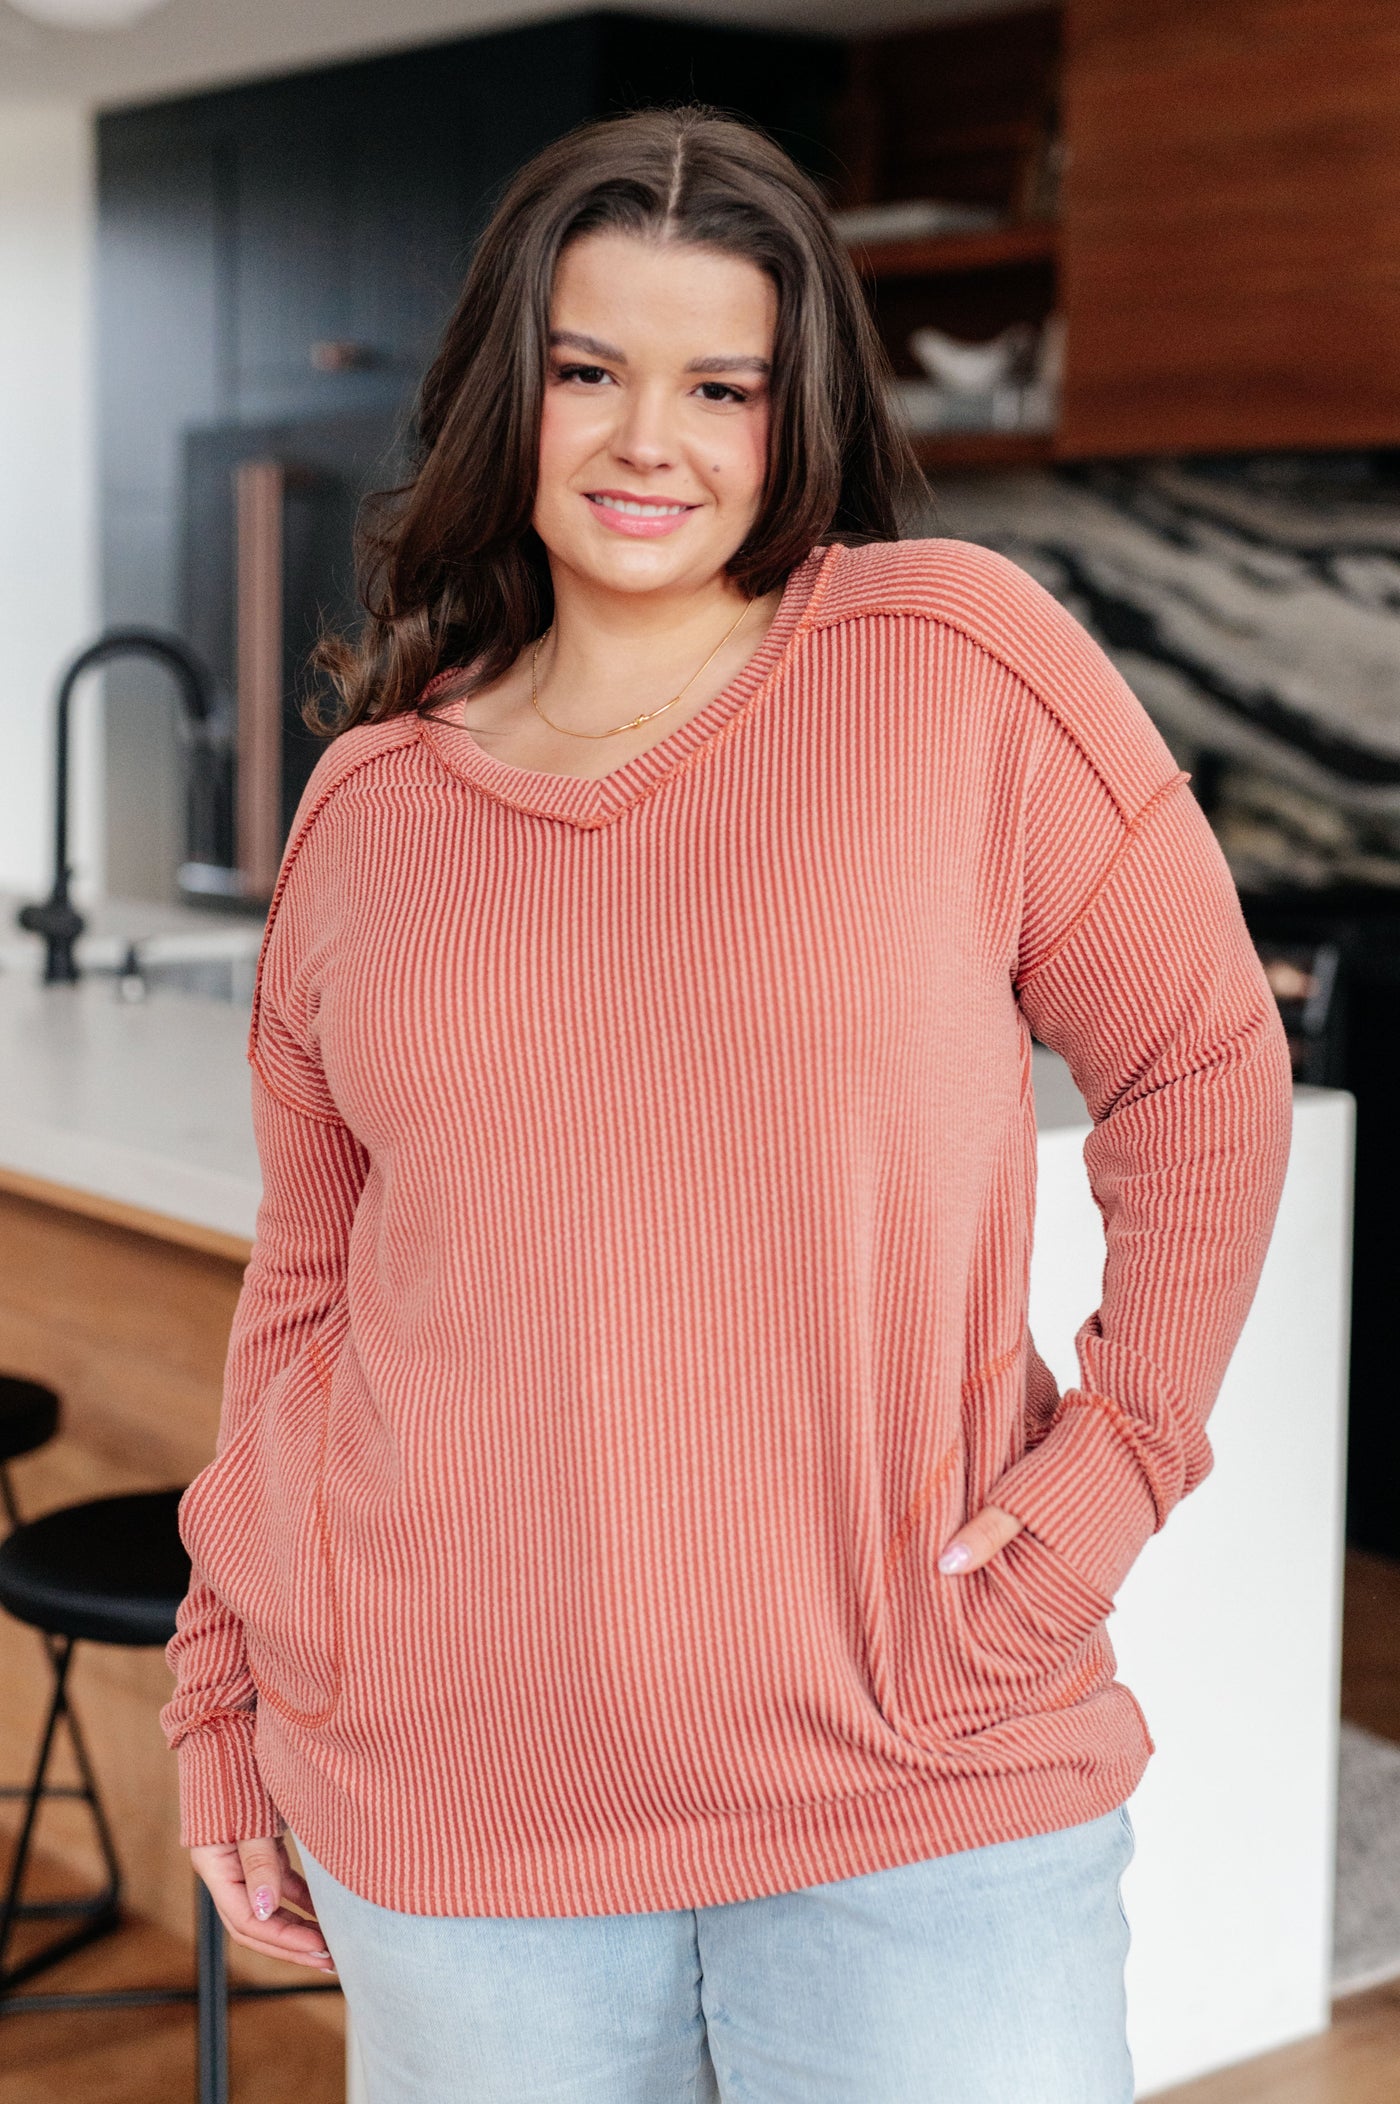 Get ready to fall in love with our First and Foremost Rib Knit Top! The ribbed knit fabric is oh-so-soft and perfect for cozying up in